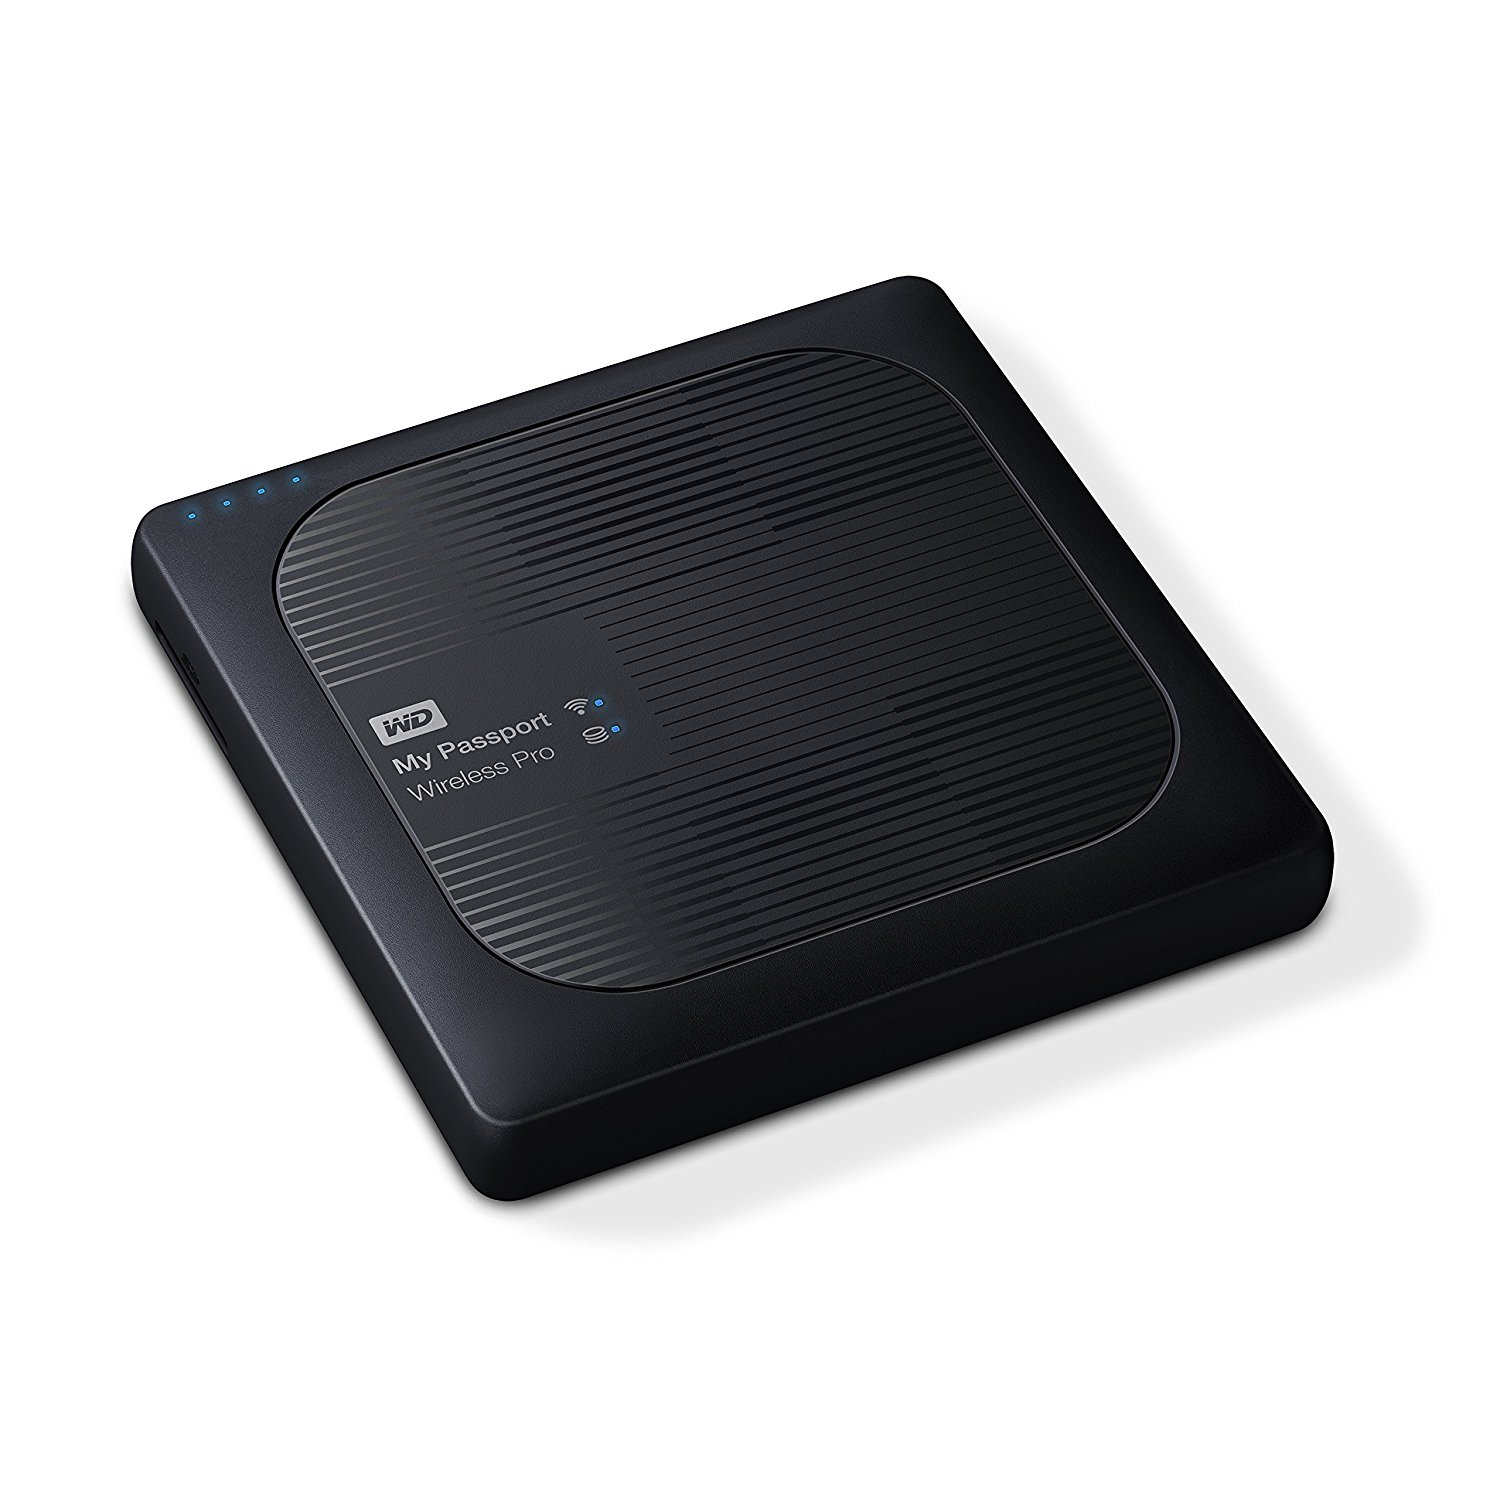 Best Wireless Hard Drive For Streaming Movies